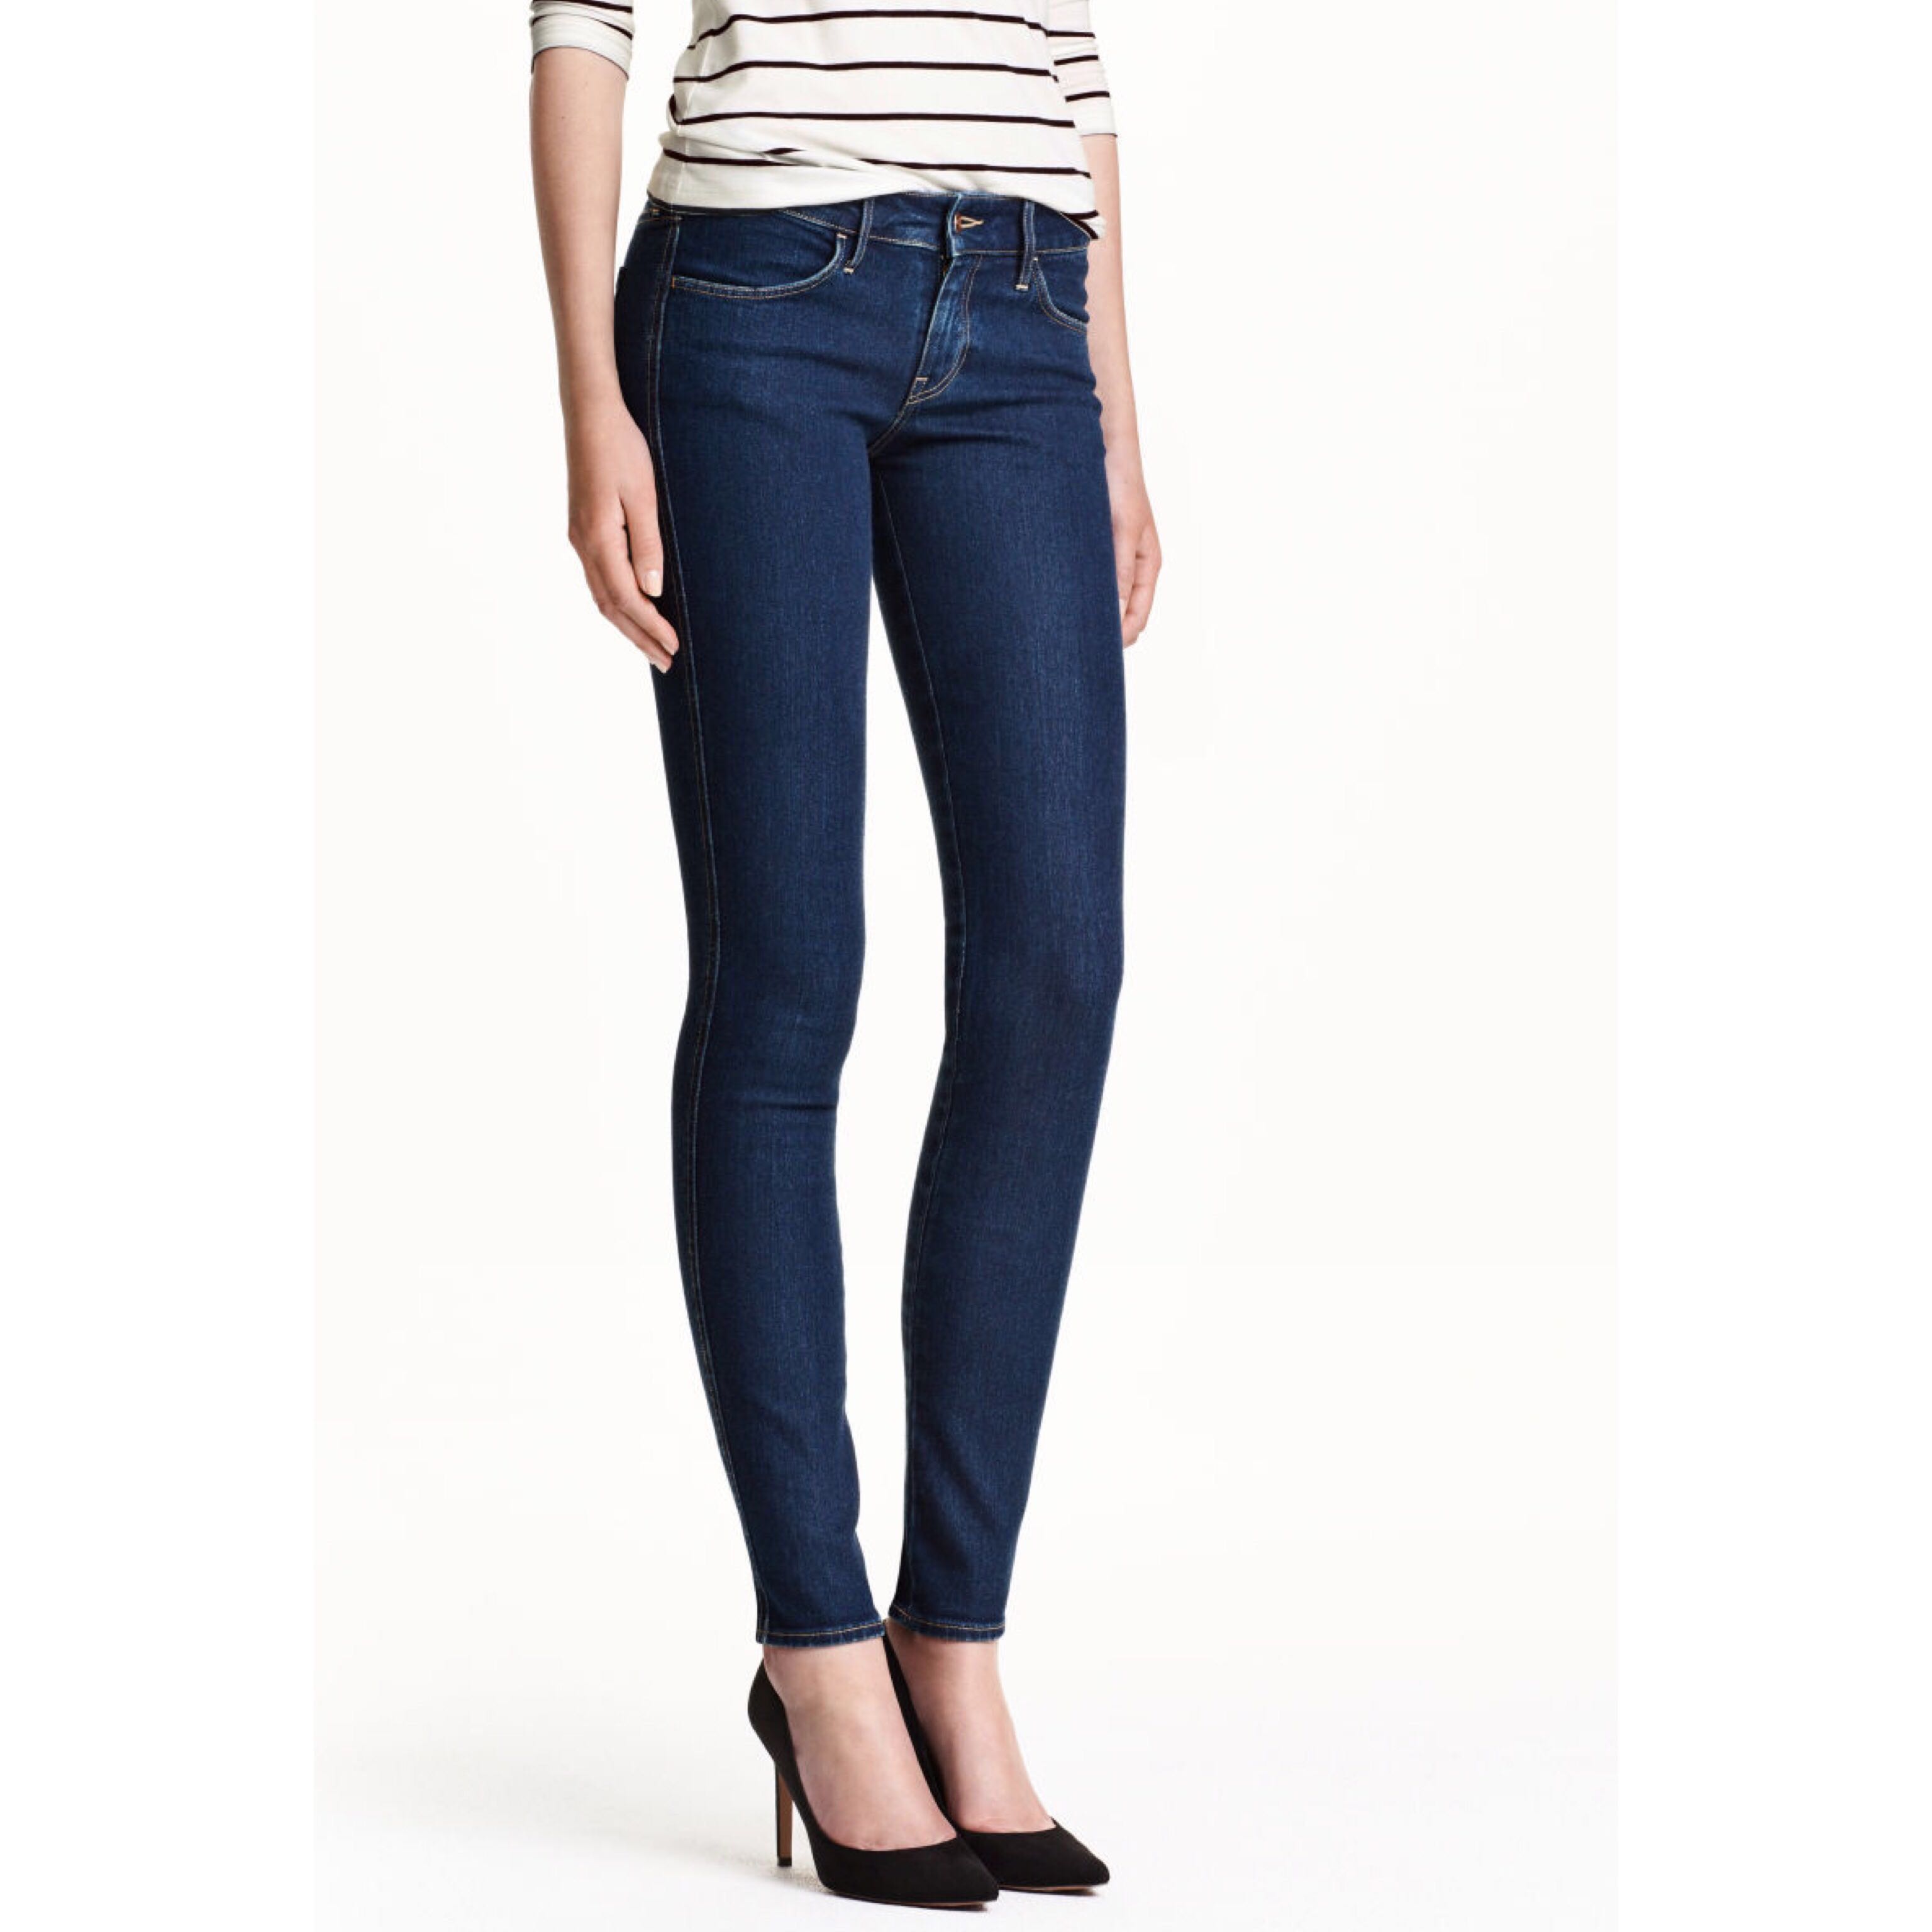 skinny low waist ankle jeans h&m